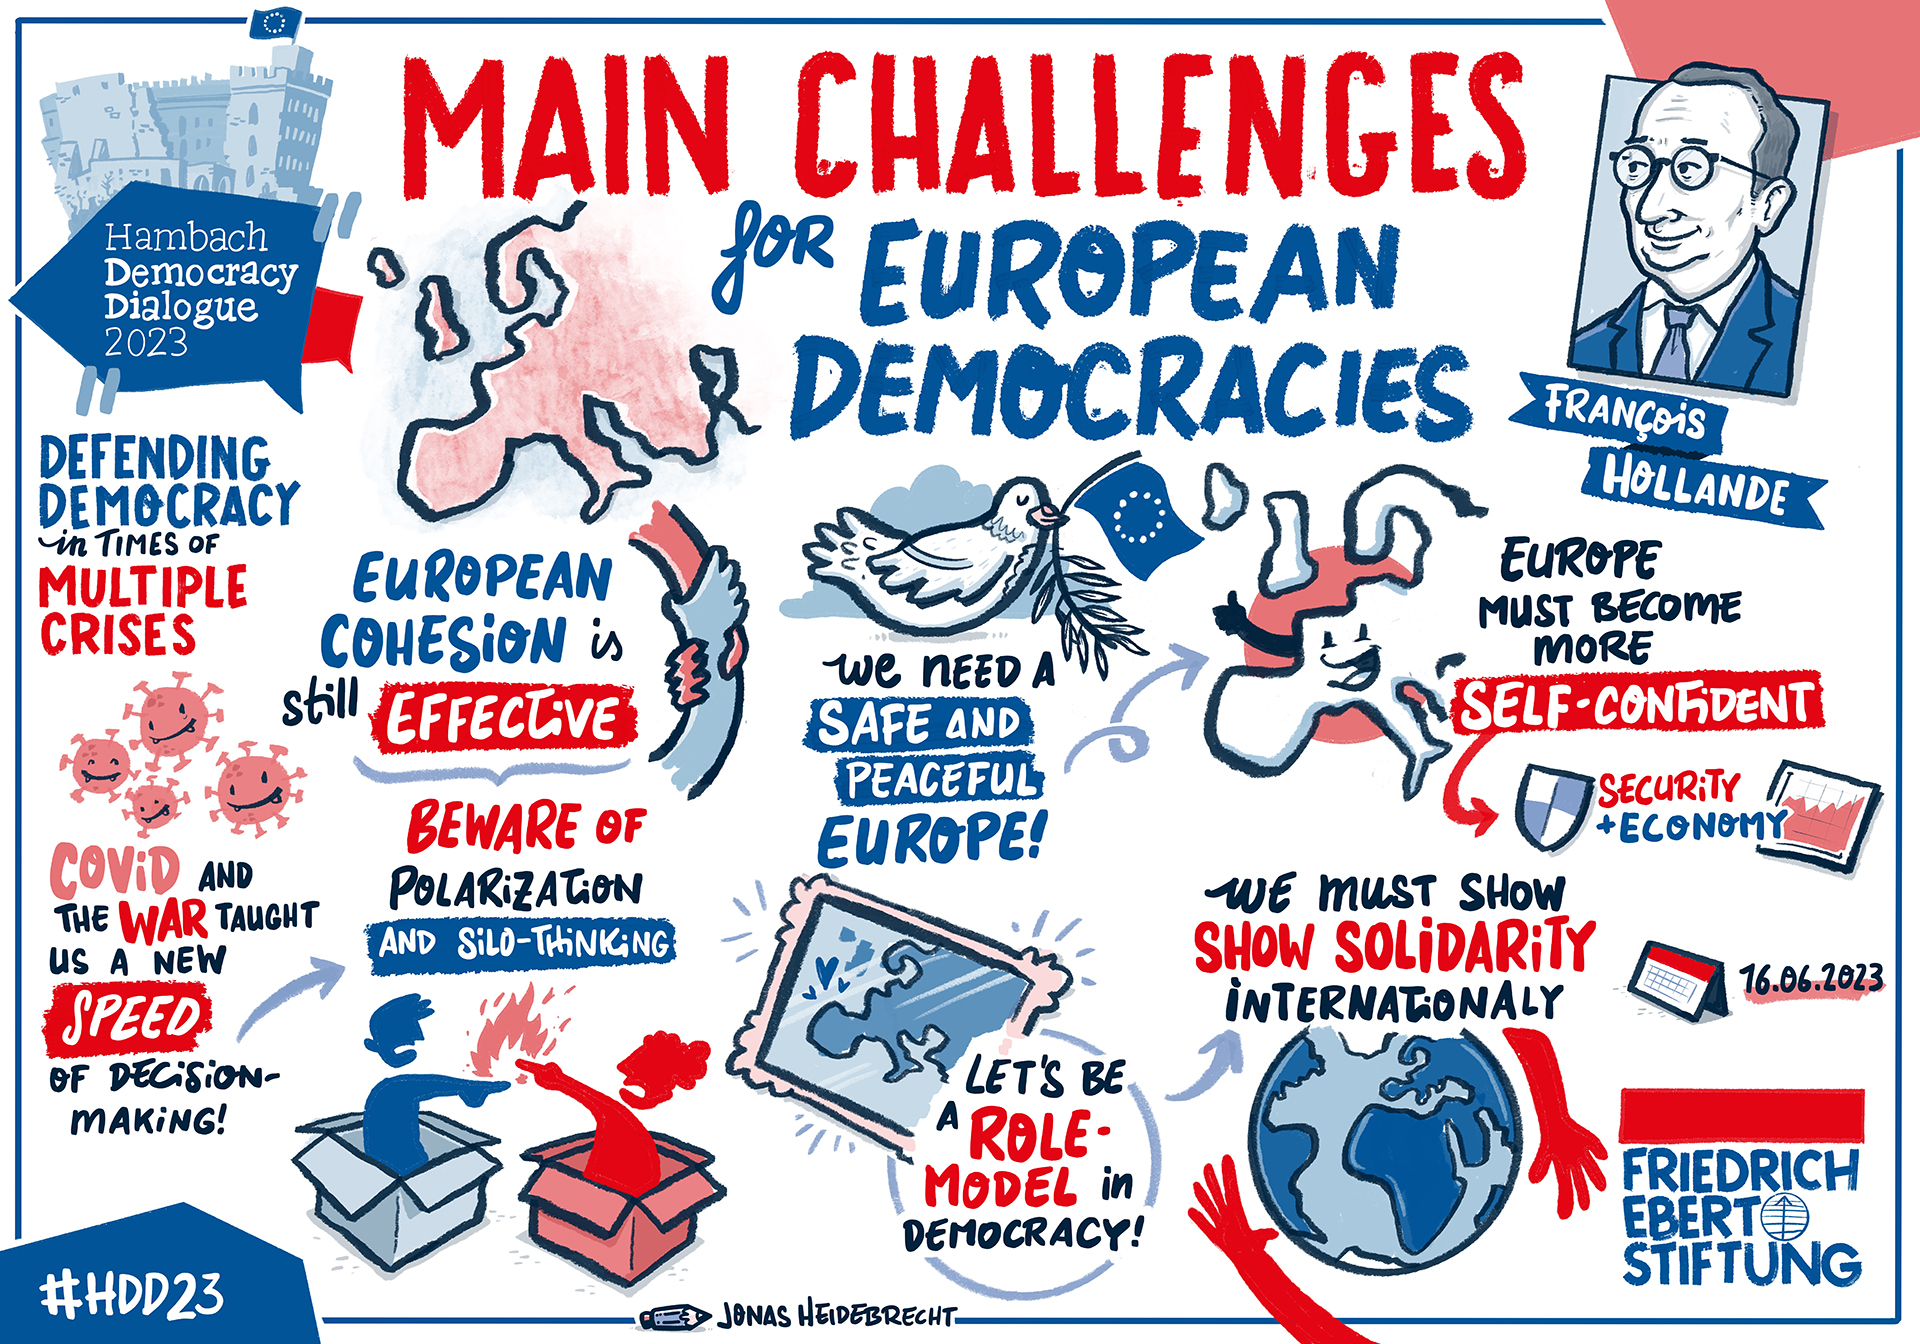 {f:if(condition: '0', then: '', else: 'Graphic Recording Keynote Speech from Francoise Hollande)}}